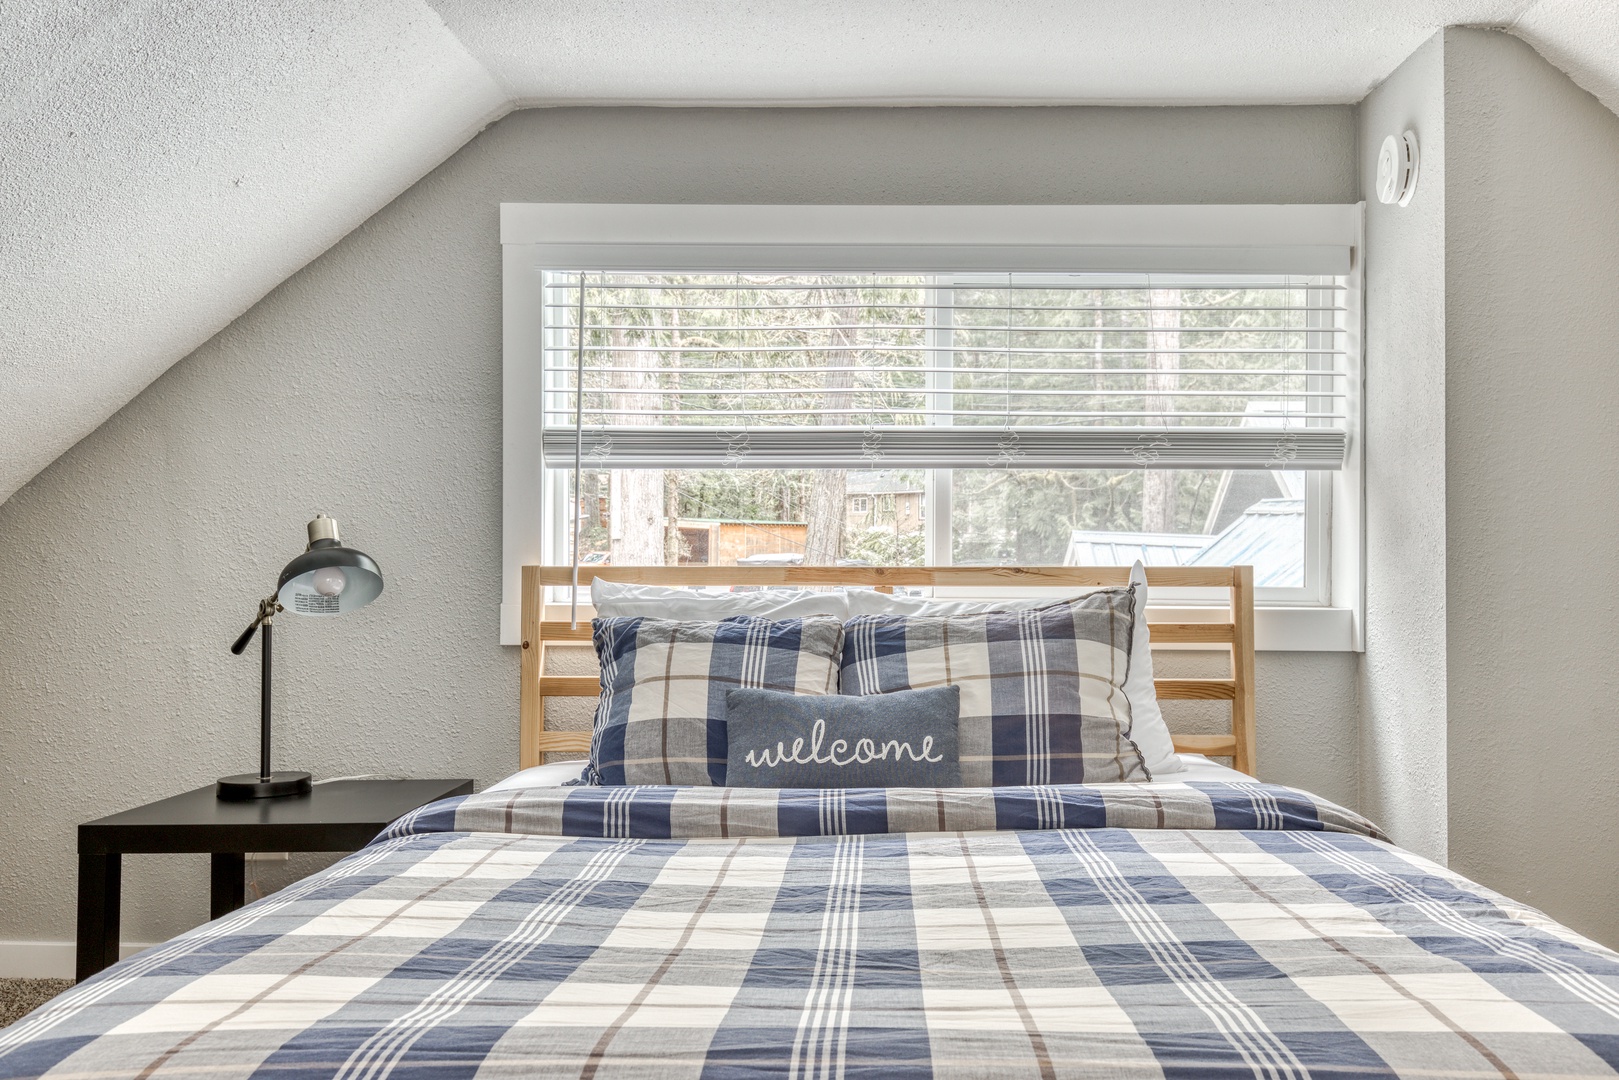 Rhododendron Vacation Rentals, Riverbend Cabin #2 - An additional queen-size air mattress, as well as a porta-crib, are available for accommodating additional guests